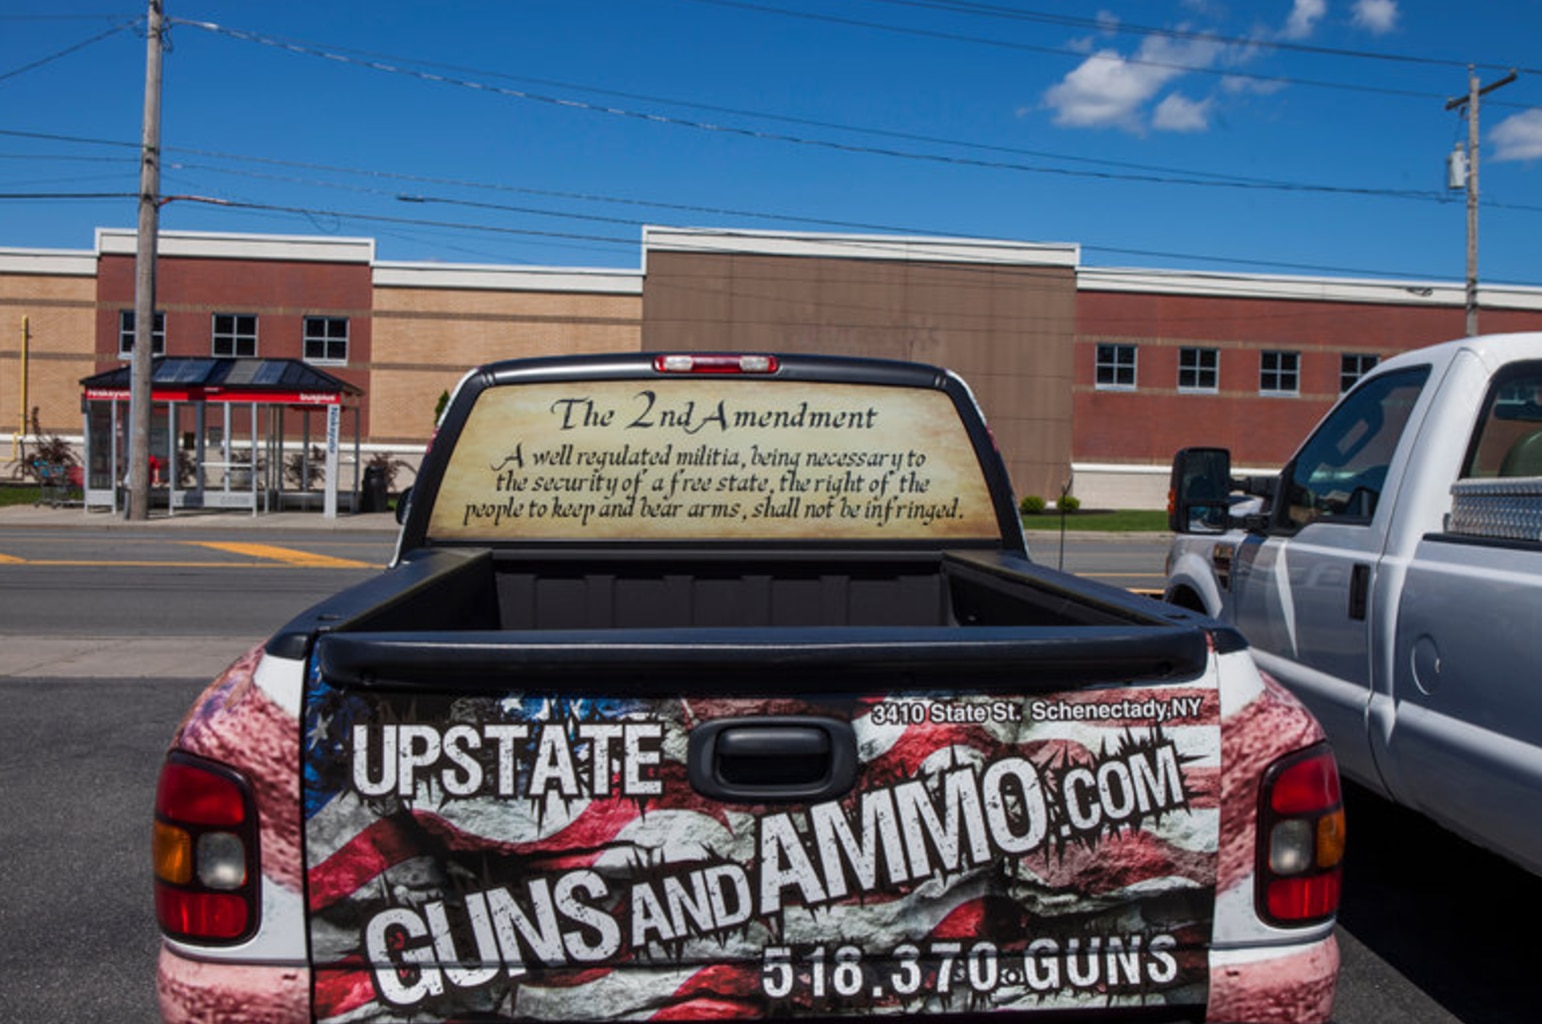 A truck is wrapped in graphics reading Upstate Guns and Ammo, the store Henry Bello legally purchased the AM-15 rifle he used to allegedly kill a clinician and himself after wounding six others at a Bronx hospital last week. (Photo: New York Times)